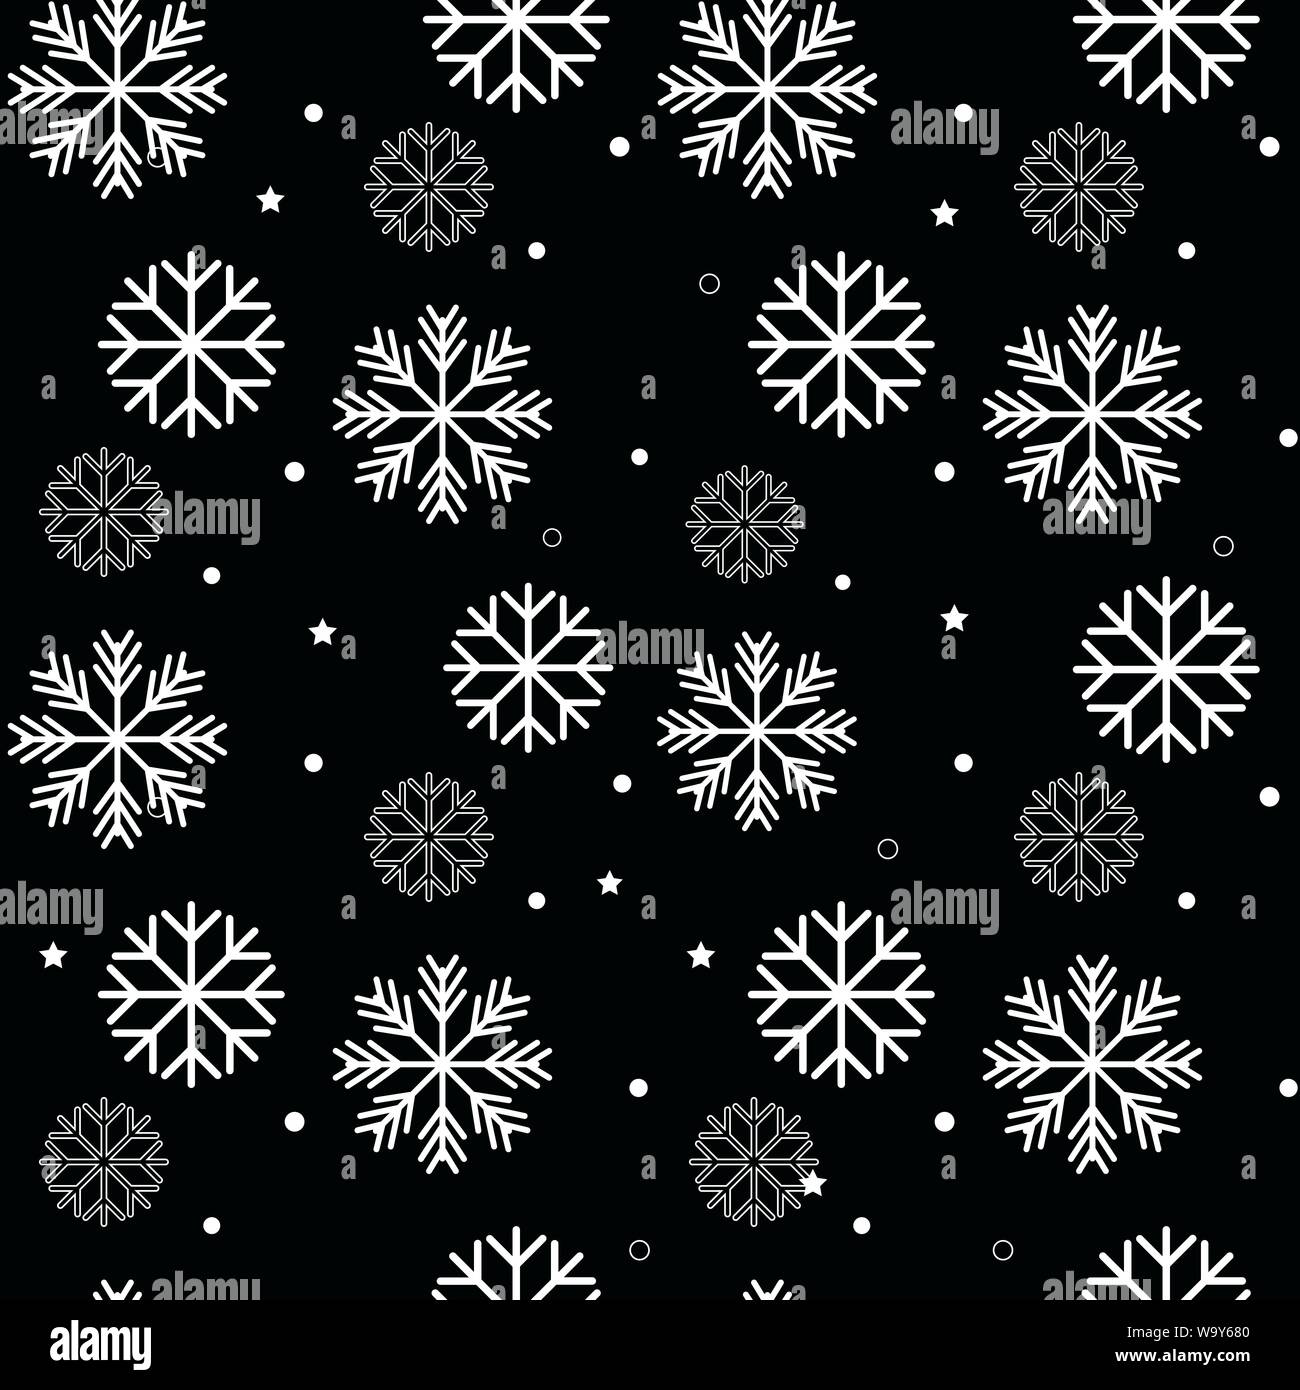 Seamless navy black background with snowflakes. Pattern snowfall with ...